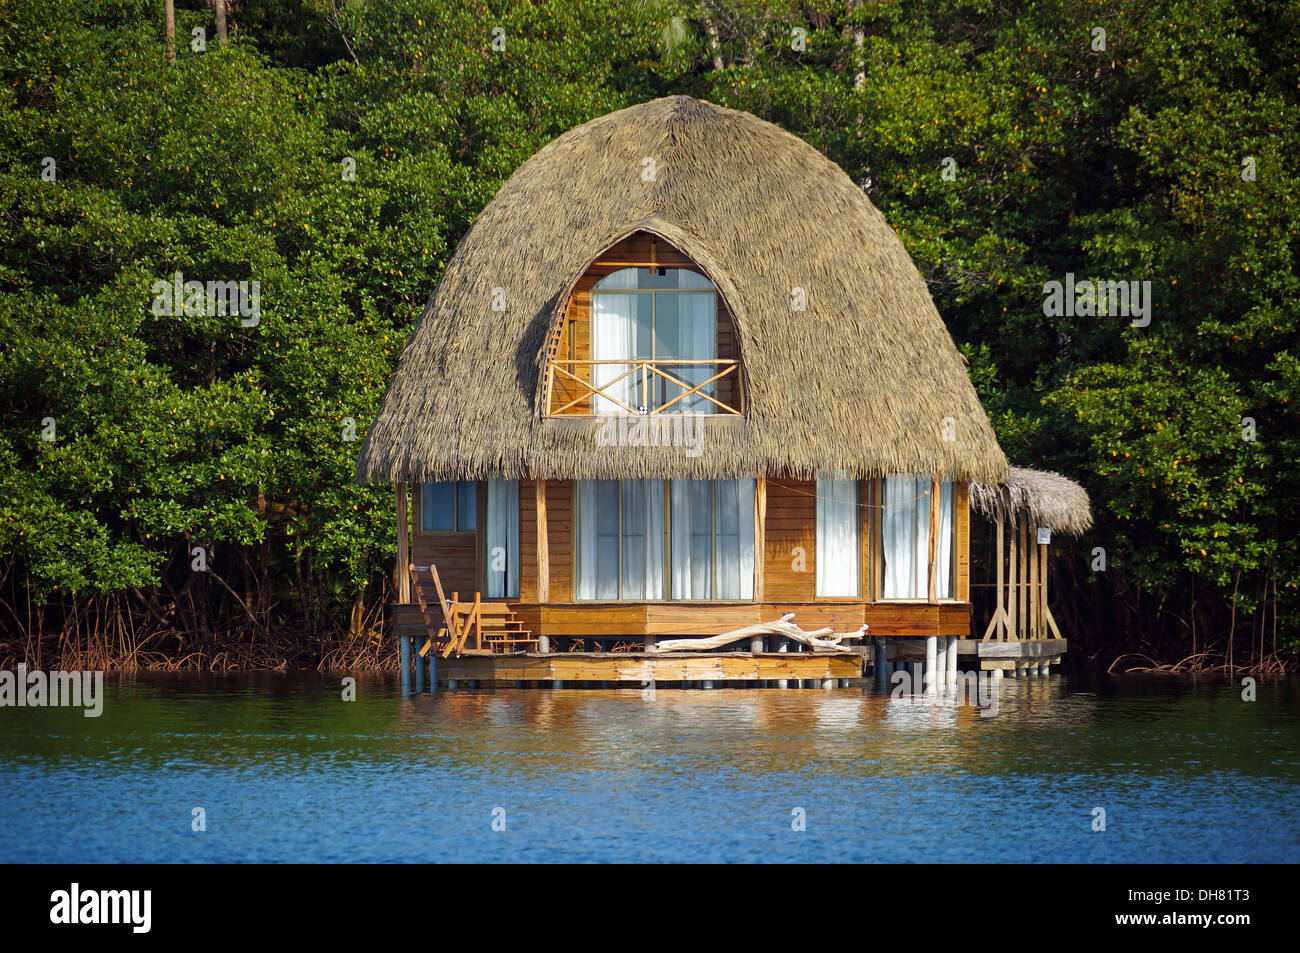 Thatched bungalow over water with lush tropical vegetation in background, Bocas del Toro, Caribbean sea, Central America, Panama Stock Photo